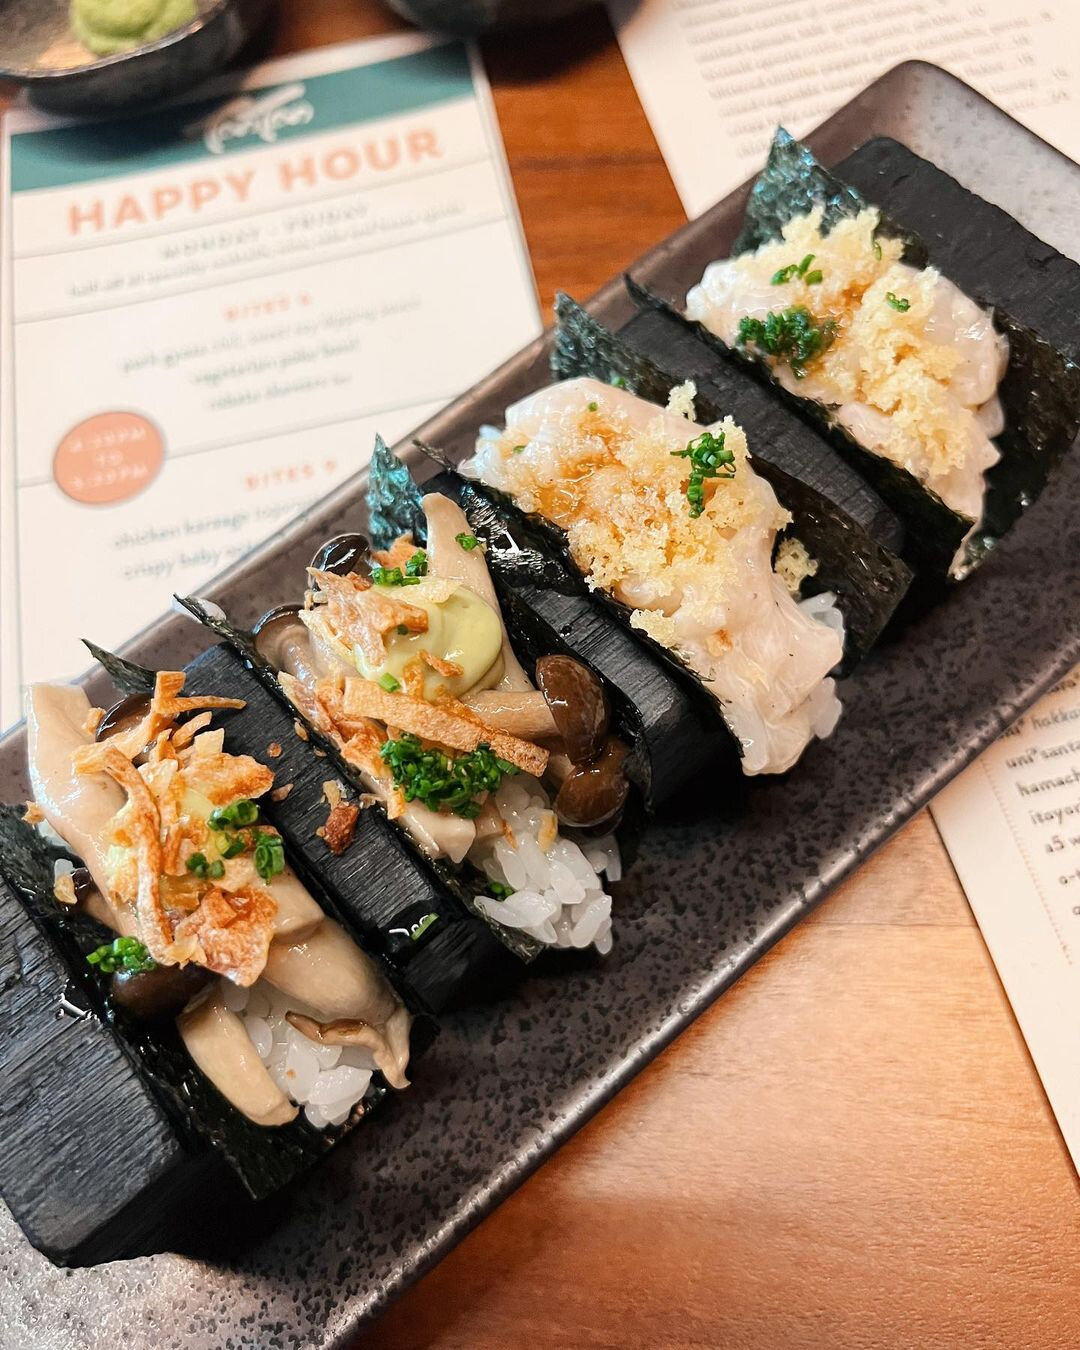 Hand rolls anyone? Catch them during Happy Hour every weekday from 4:30-5:30pm 🤩 @abbey_appel